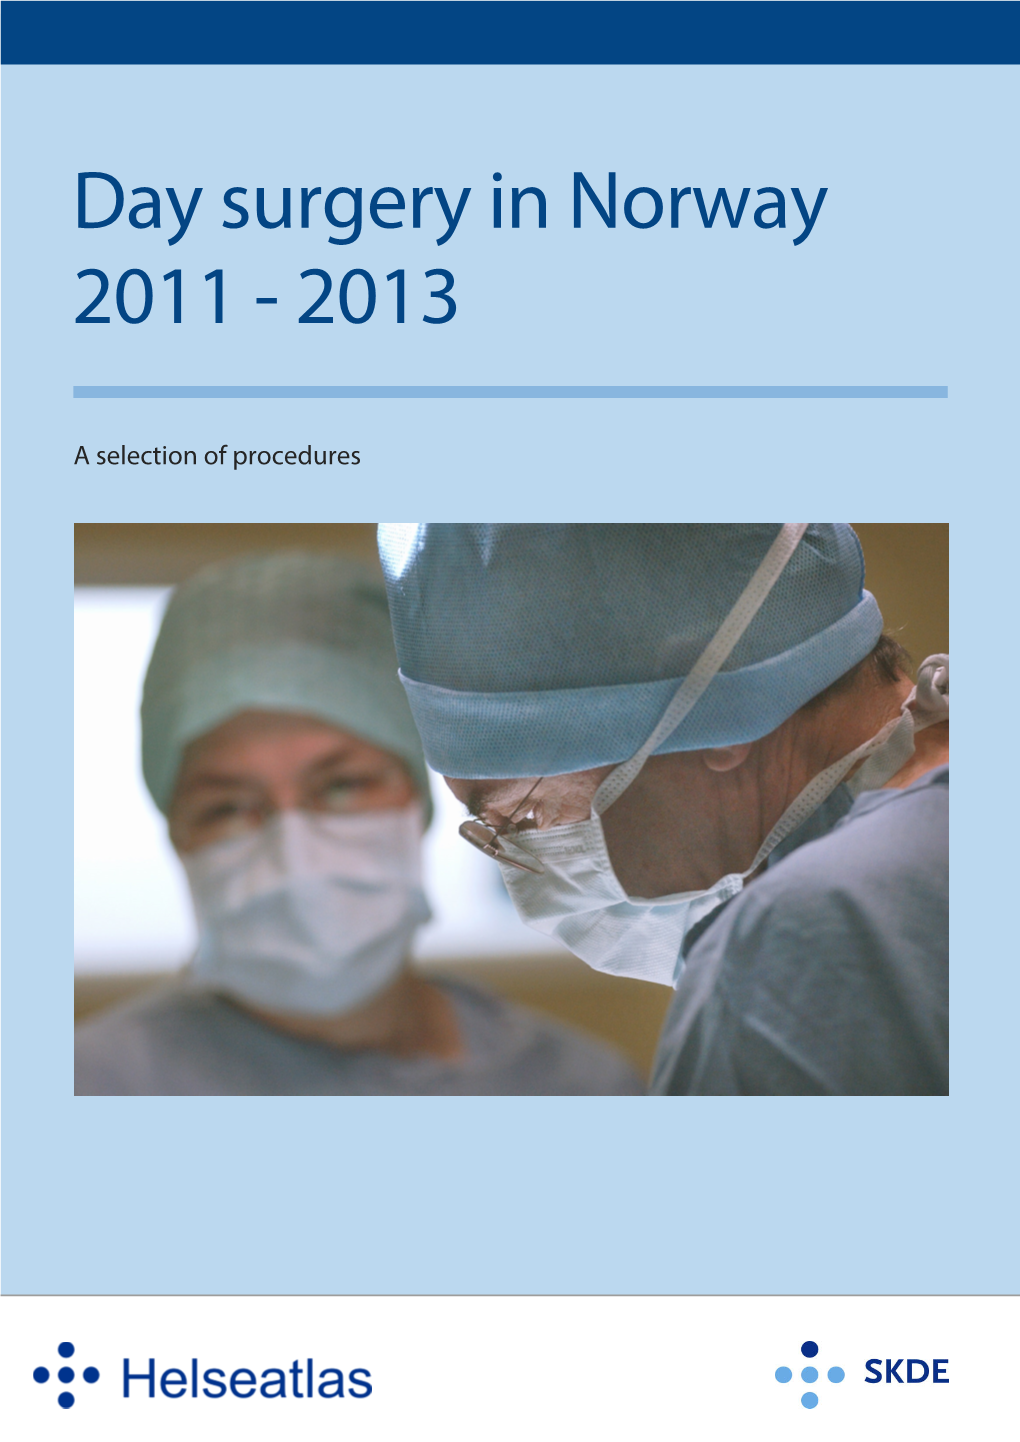 Day Surgery in Norway 2011 - 2013